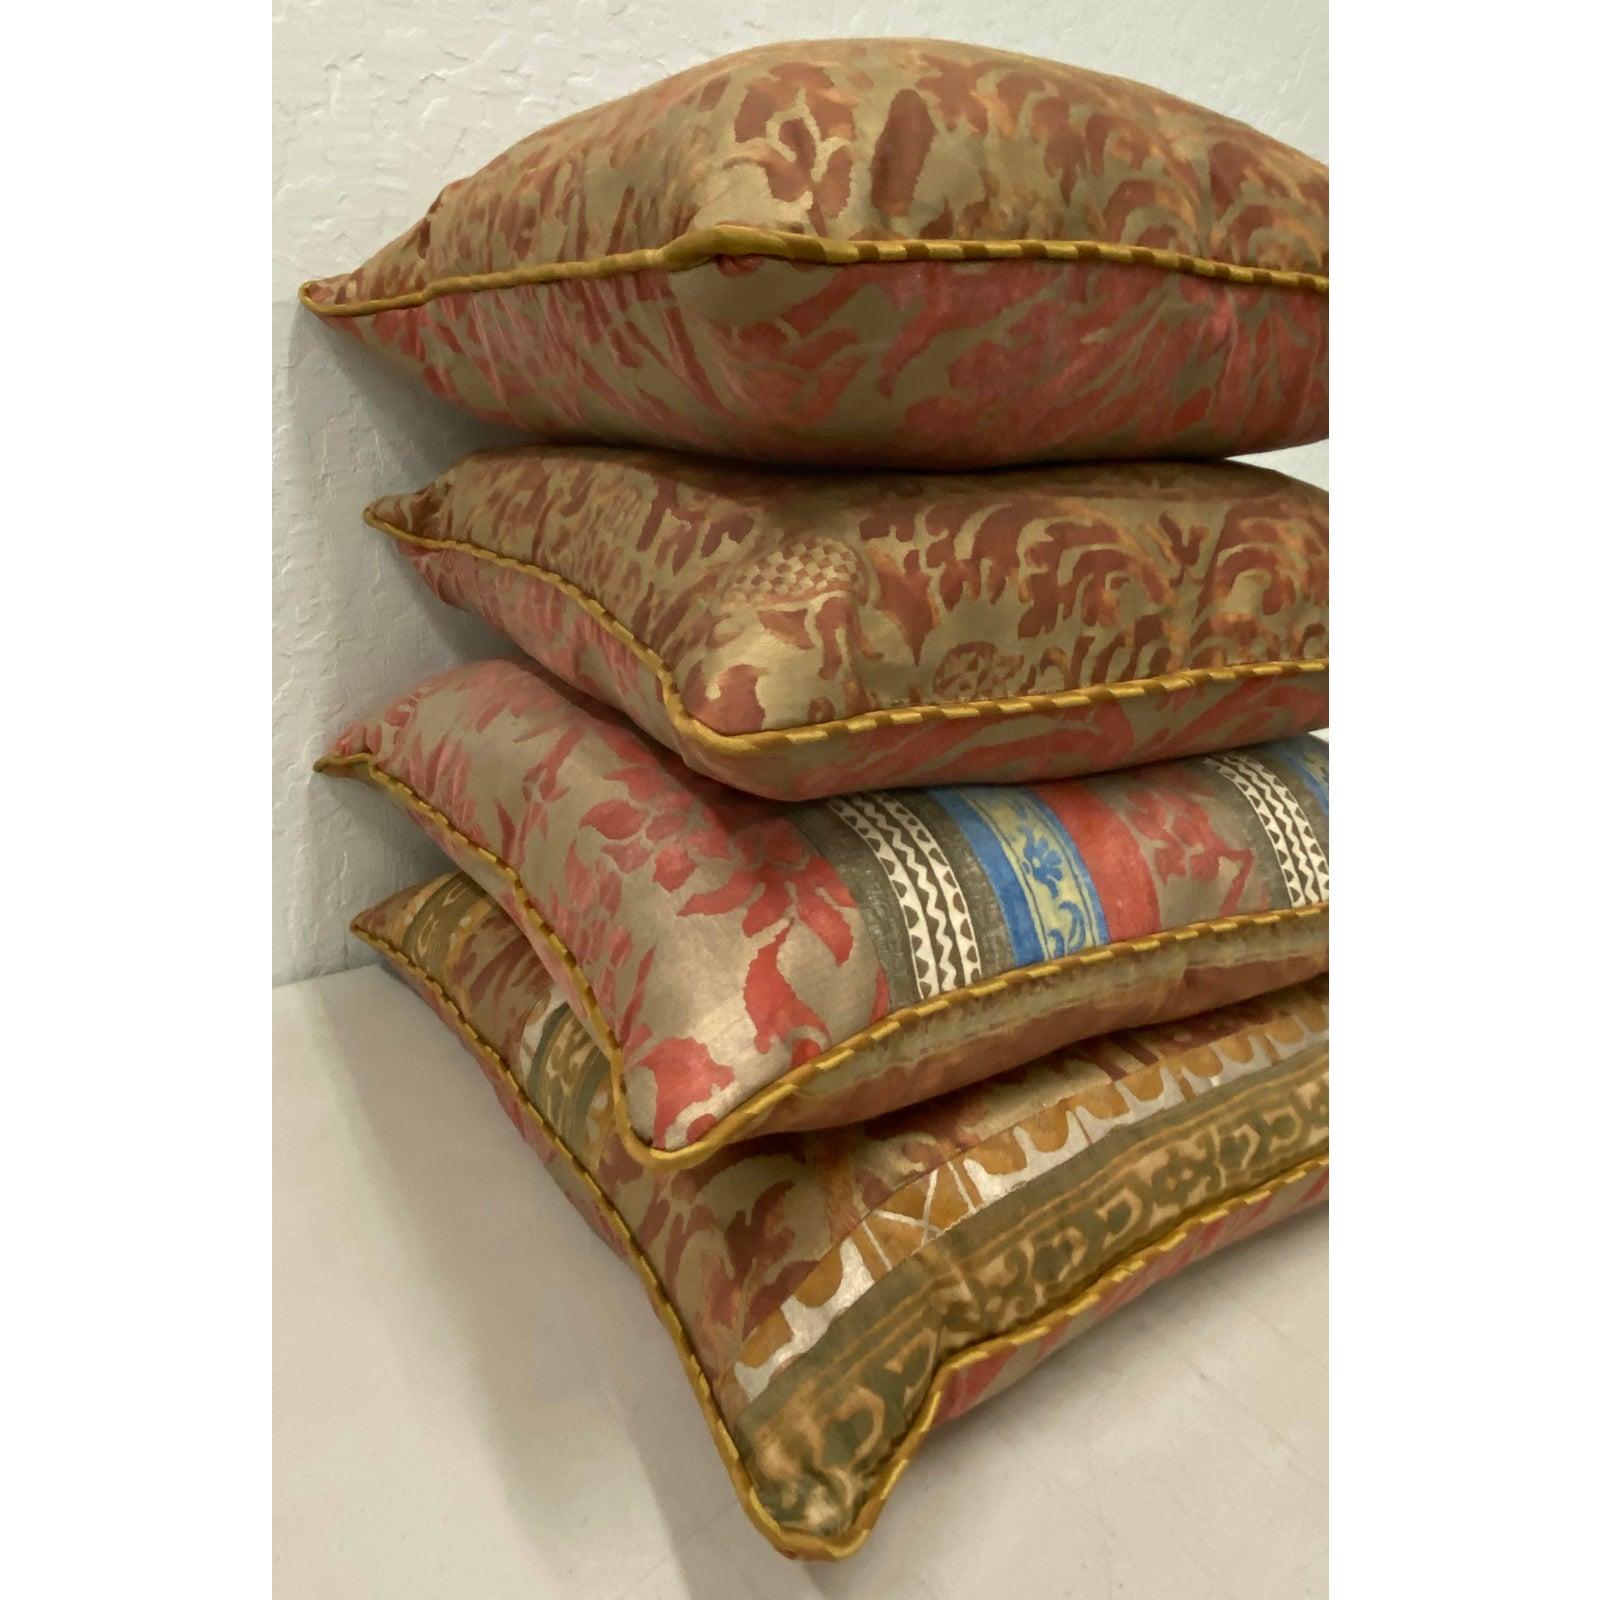 Spanish Set of Four Fortuny Fabric Cushions / Pillows